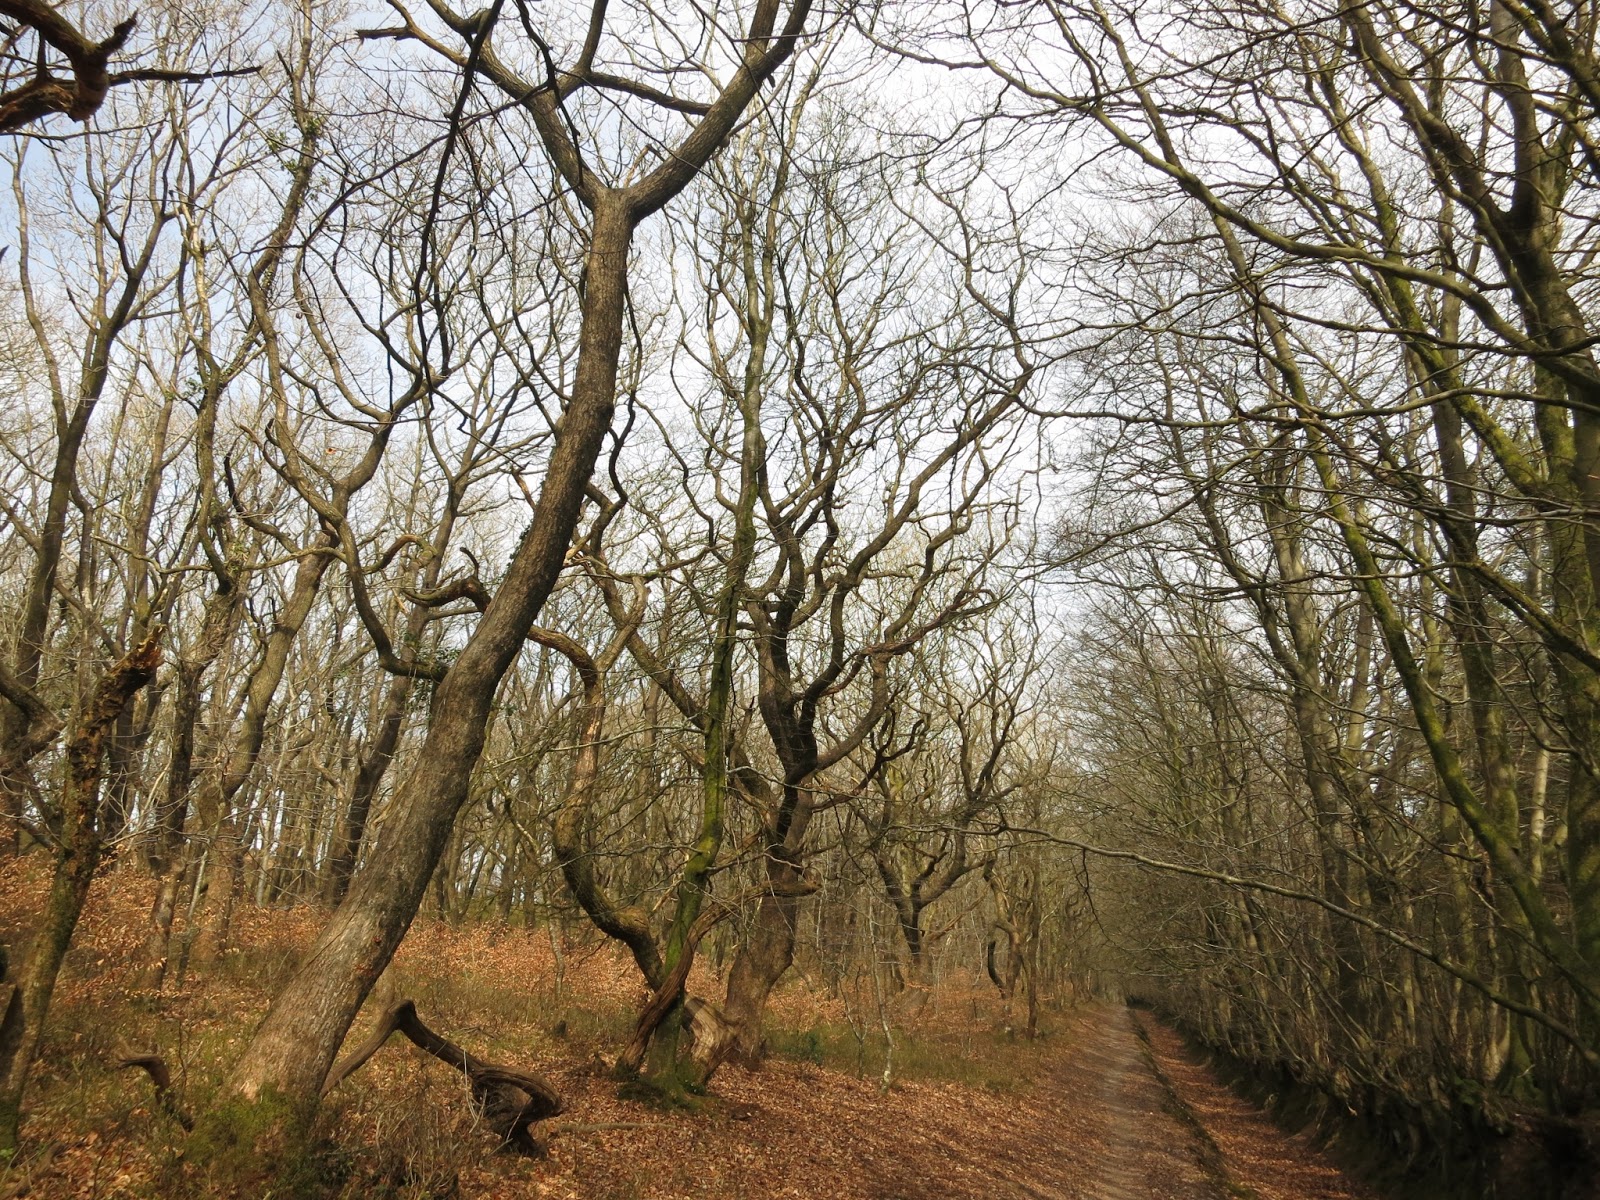 Beech lined path on Quantock Ridgeway. Trees bare because it's April.